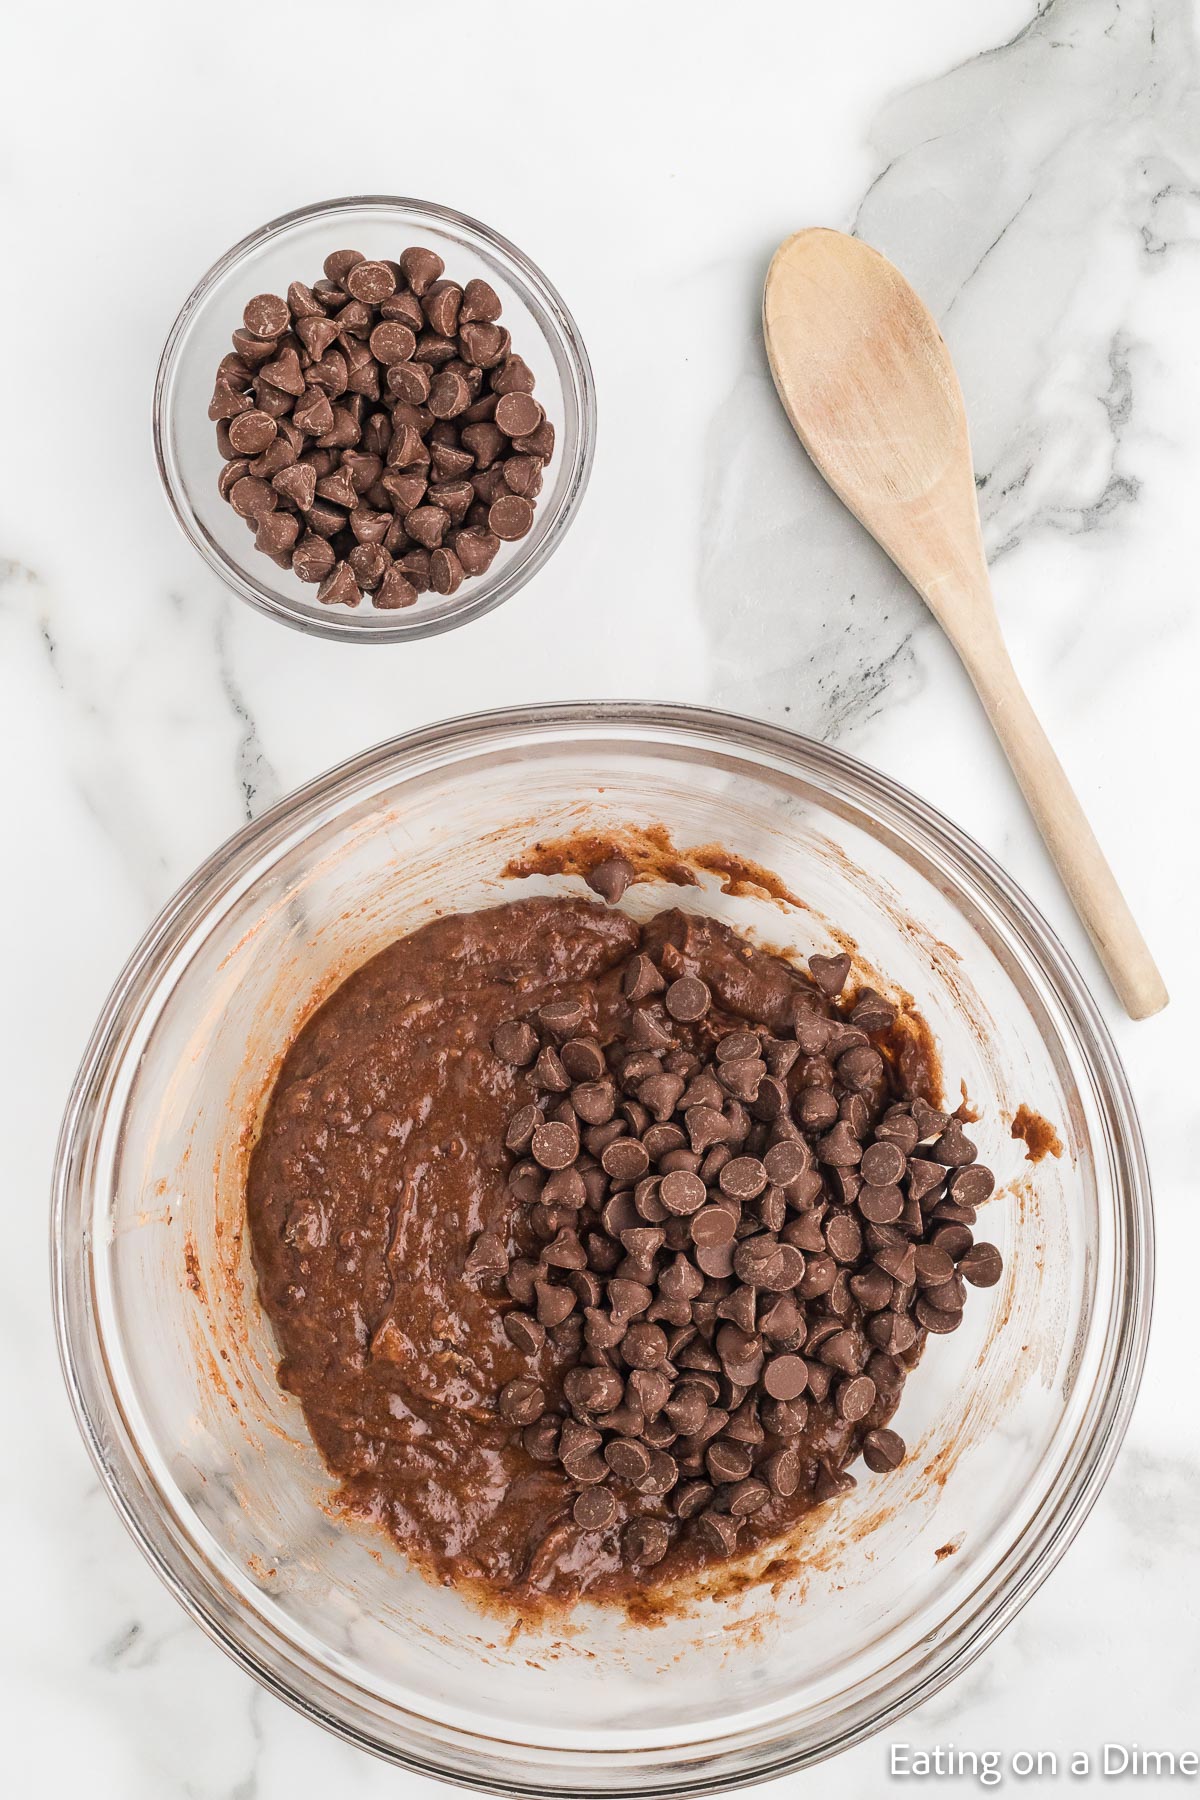 Mixing the chocolate chips into the brownie batter